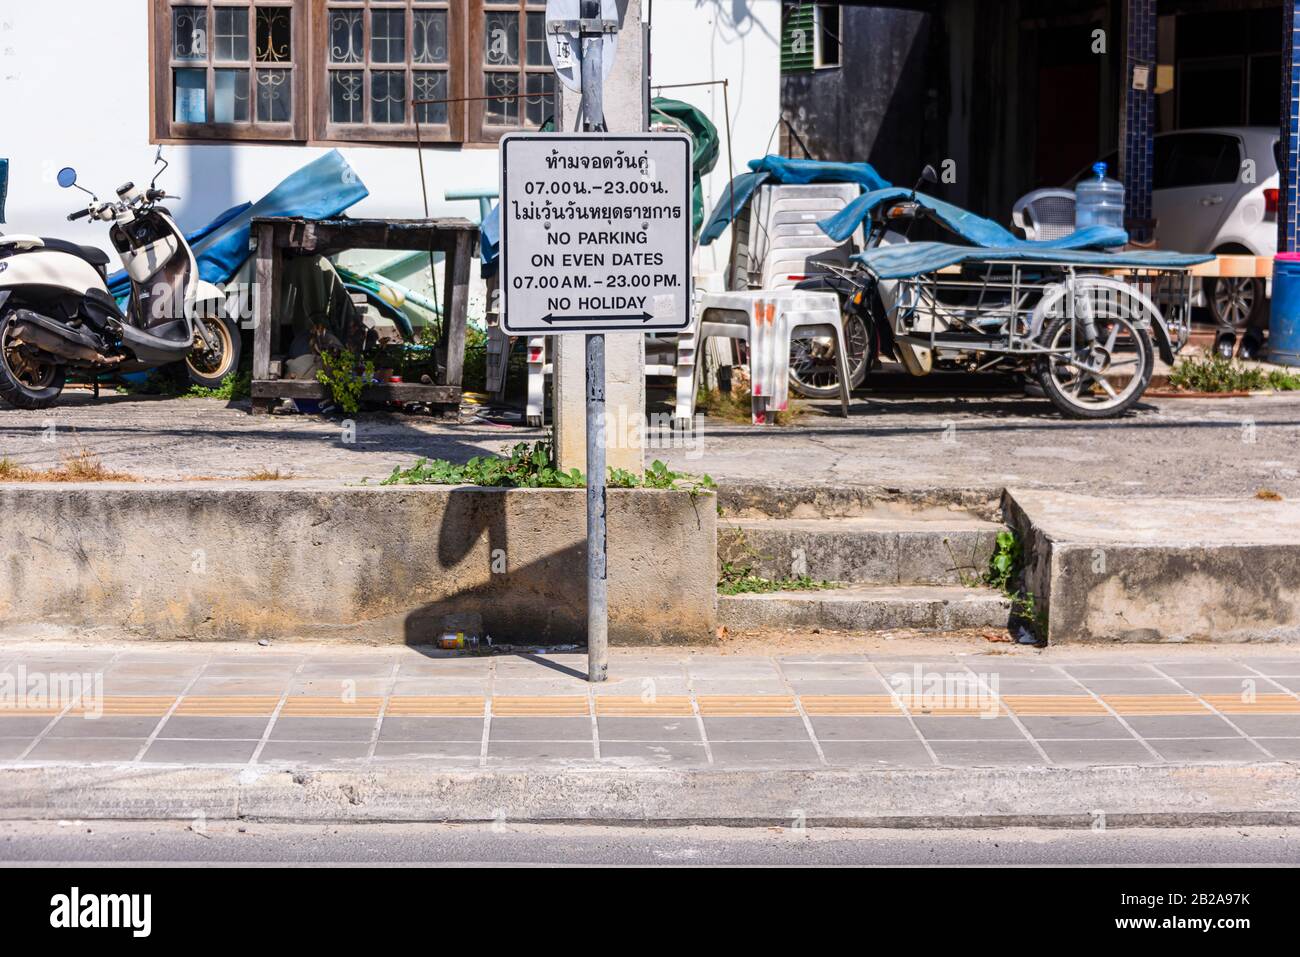 No Parking sign advising motorists not to park on even dates from 7am to 11pm.  Kata village, Phuket, Thailand Stock Photo